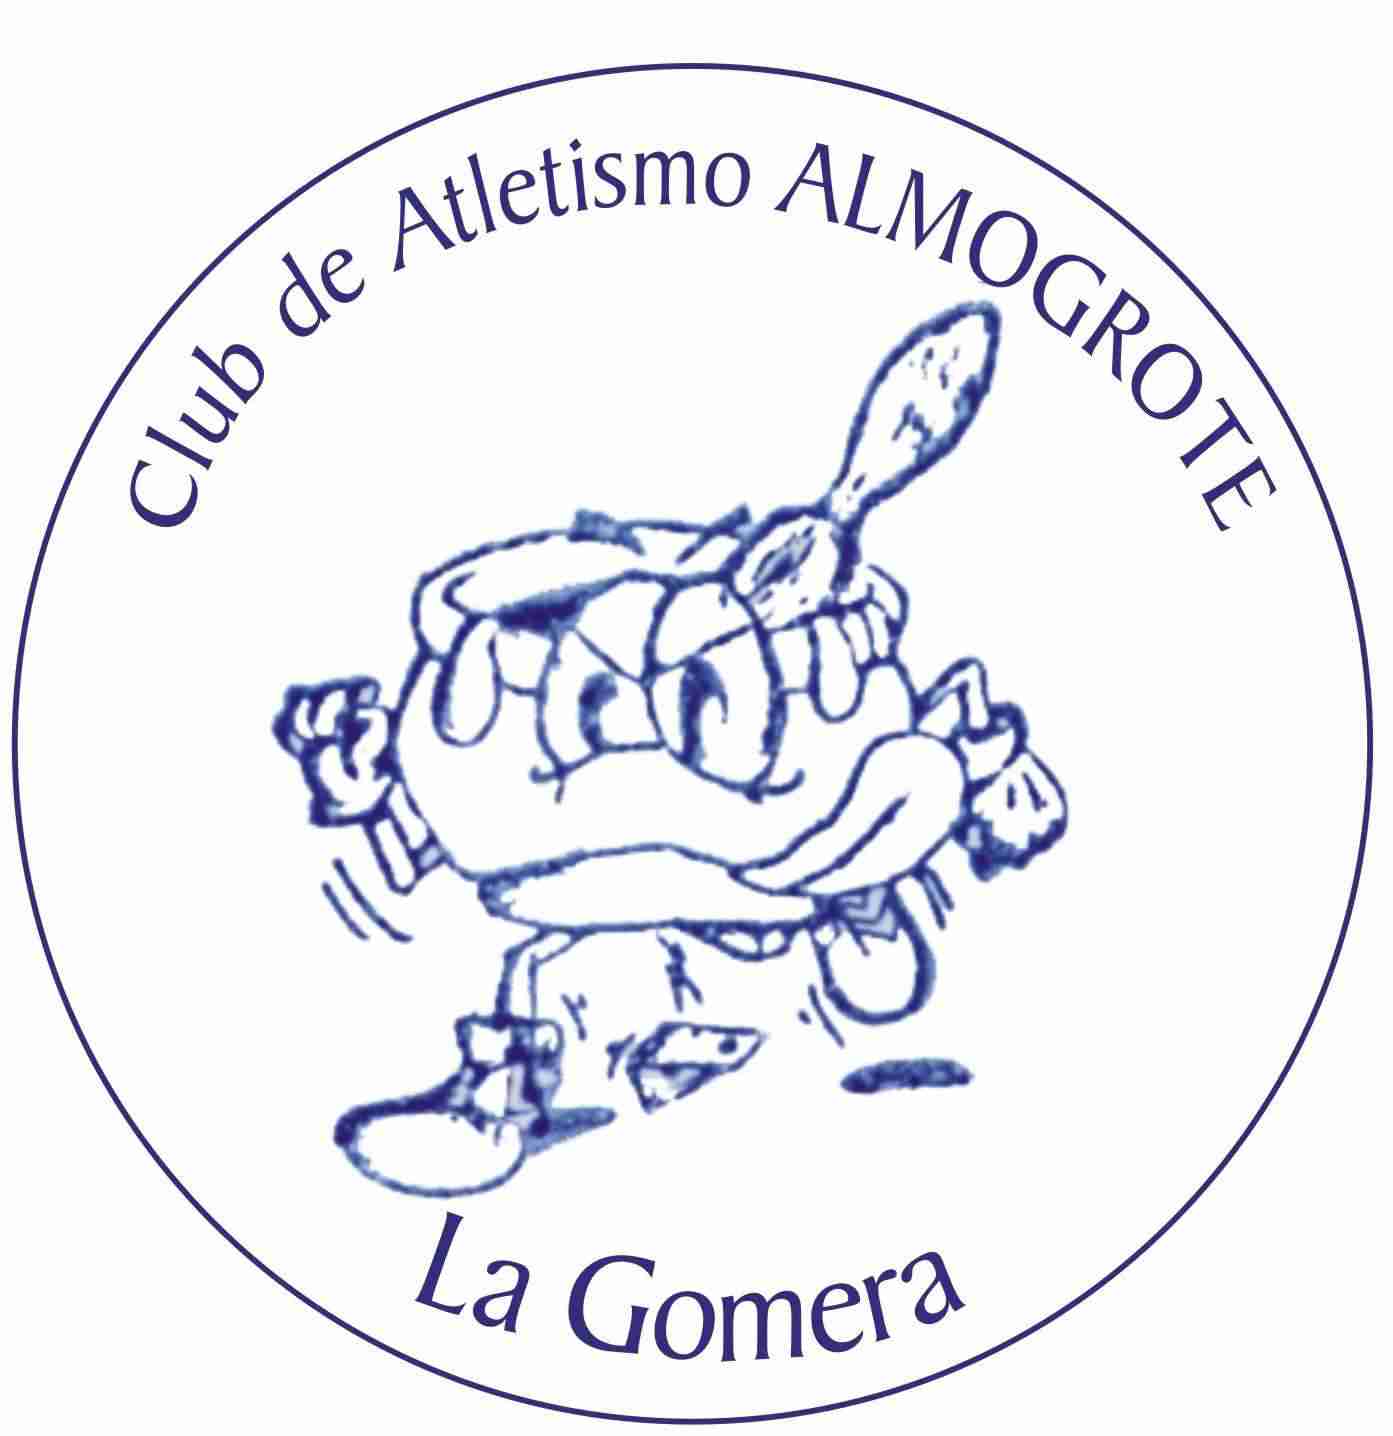 http://www.almogrote.es/wp-content/uploads/2012/04/logo-almogrote.jpg